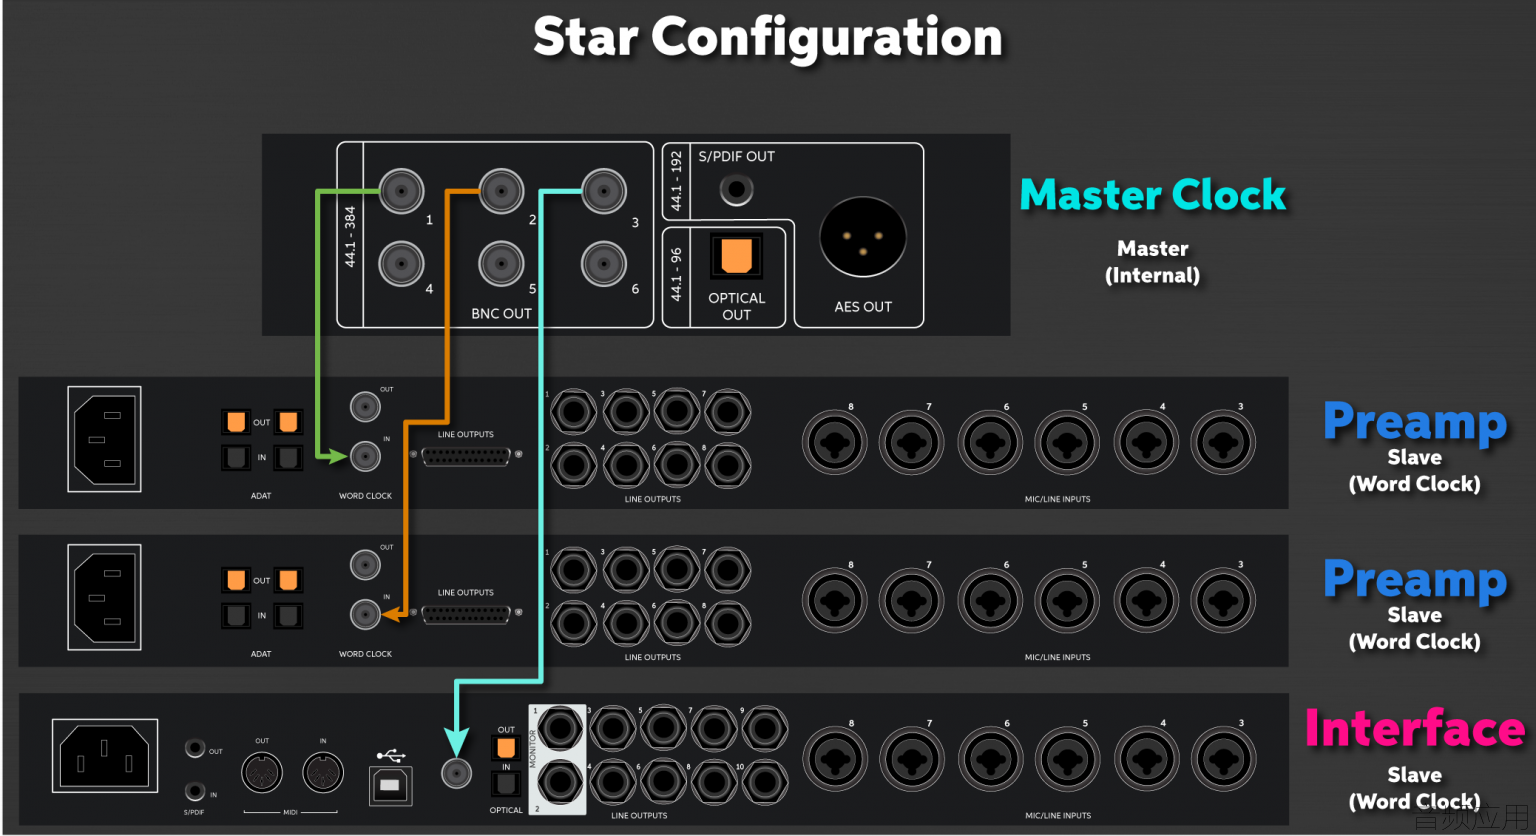 Star-configuration-1024x557.png